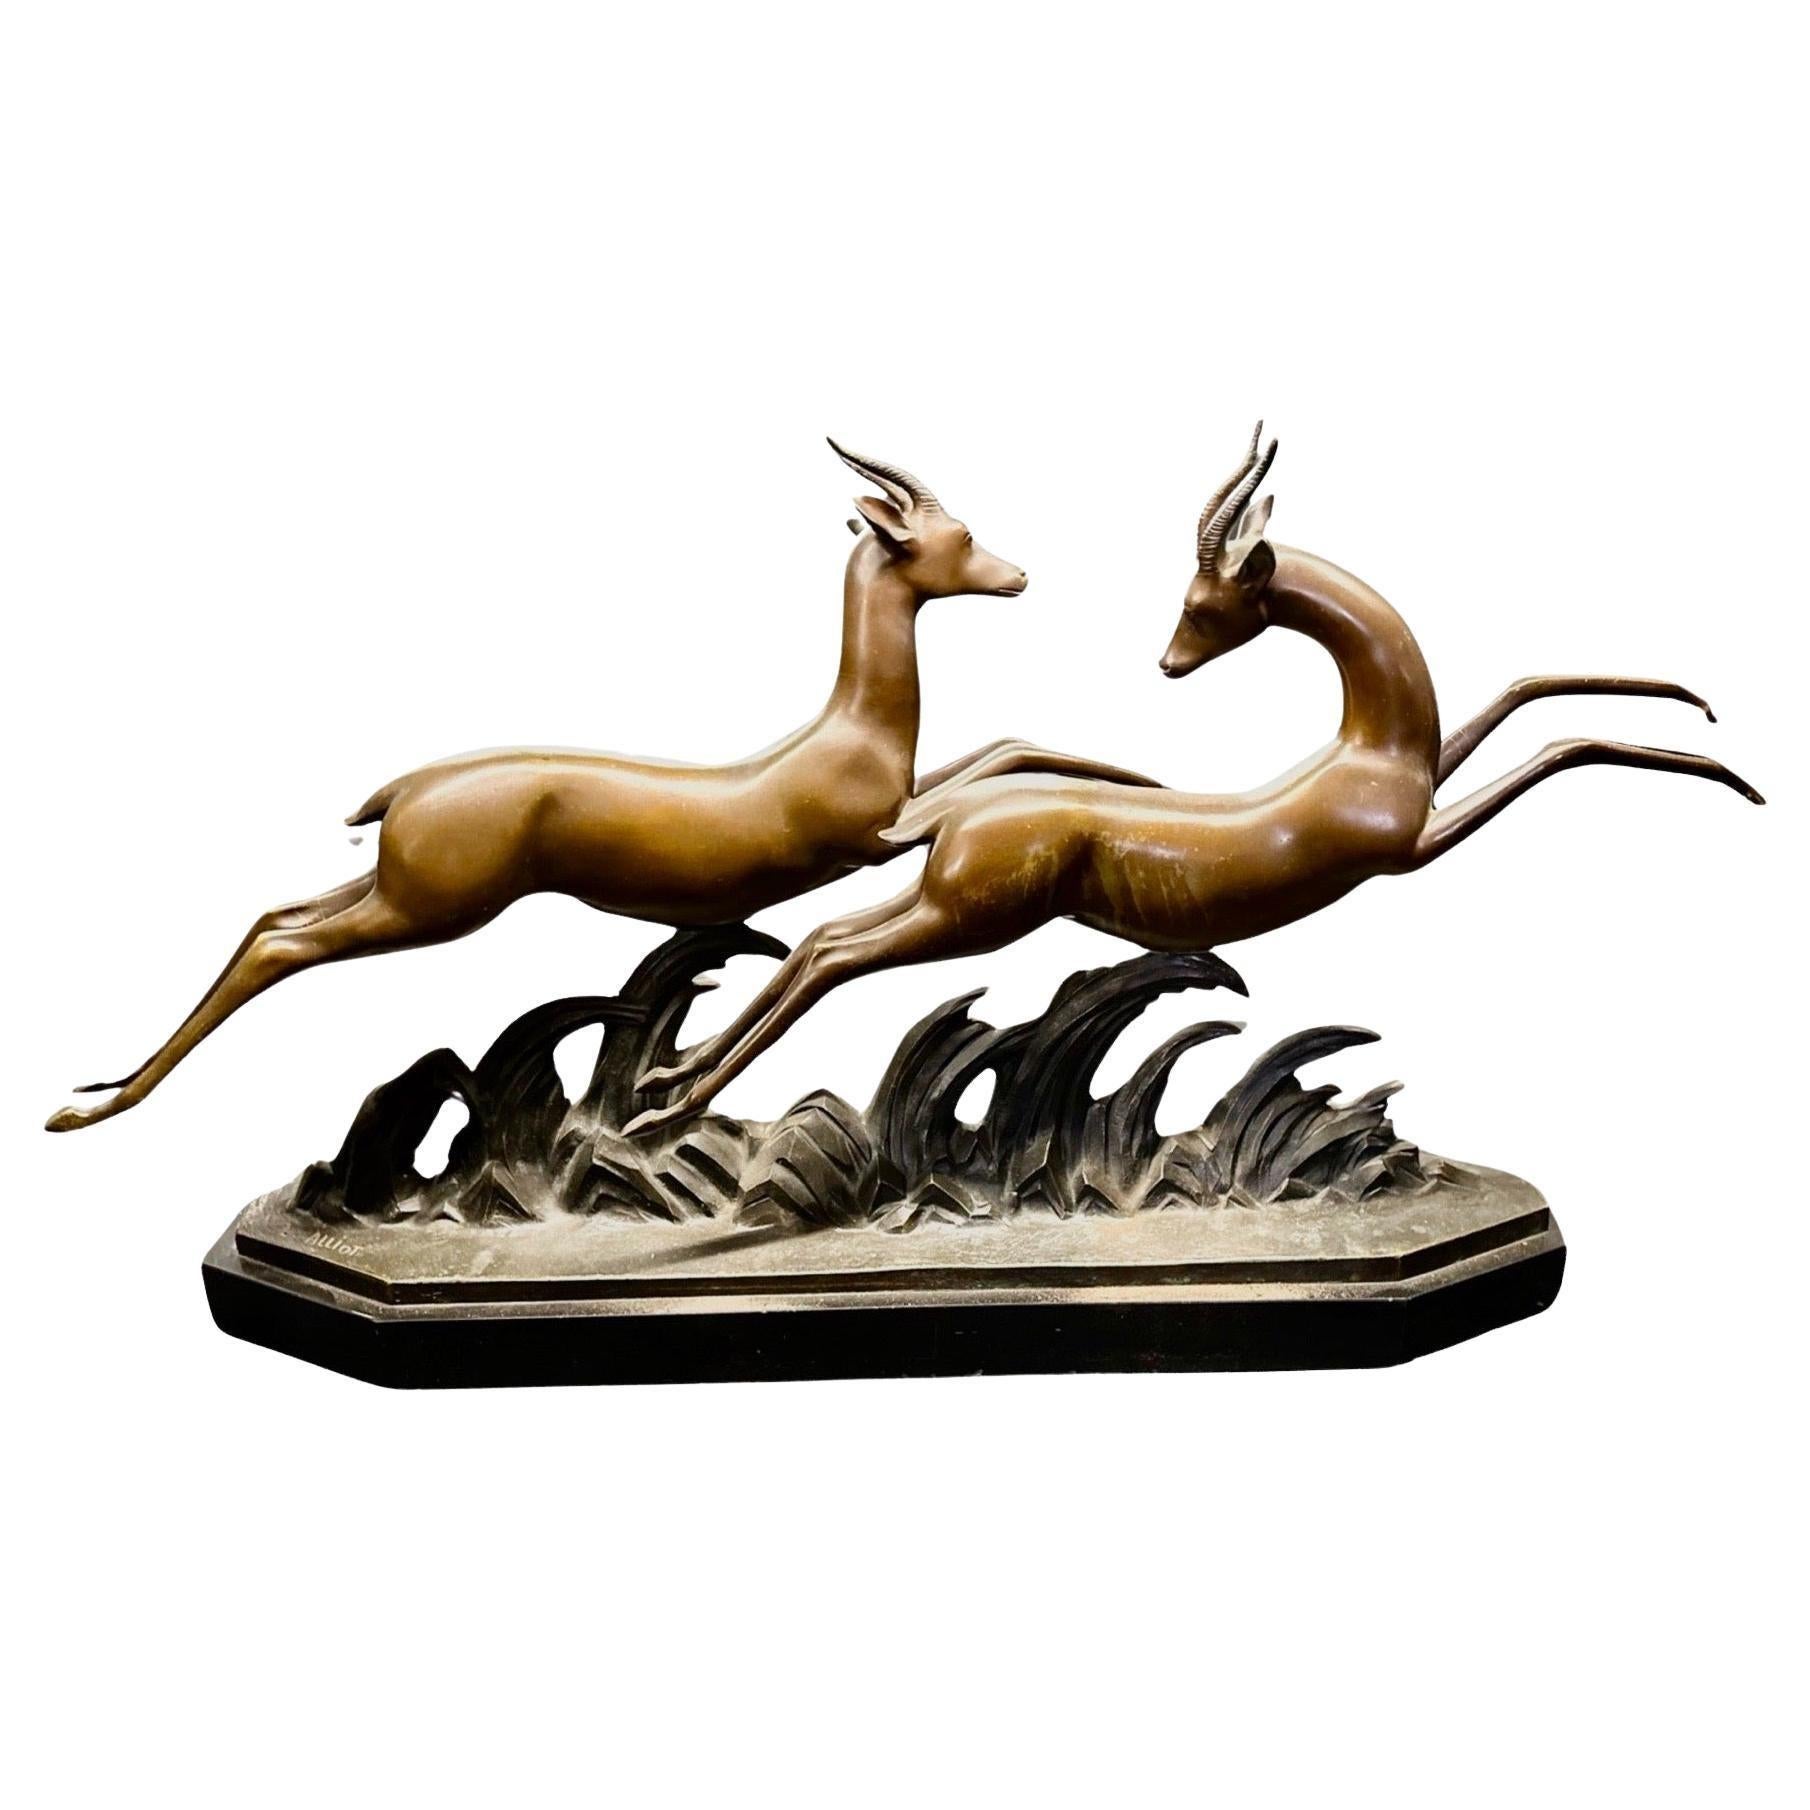 Lucien Alliot French Art Deco Bronze The Gazelles 1930. The brown patina on a marble base signed on the bronze L Alliot and stamped bronze on the deer. This particular piece has exceptional rhythm where the two gazelles interplay in a movement